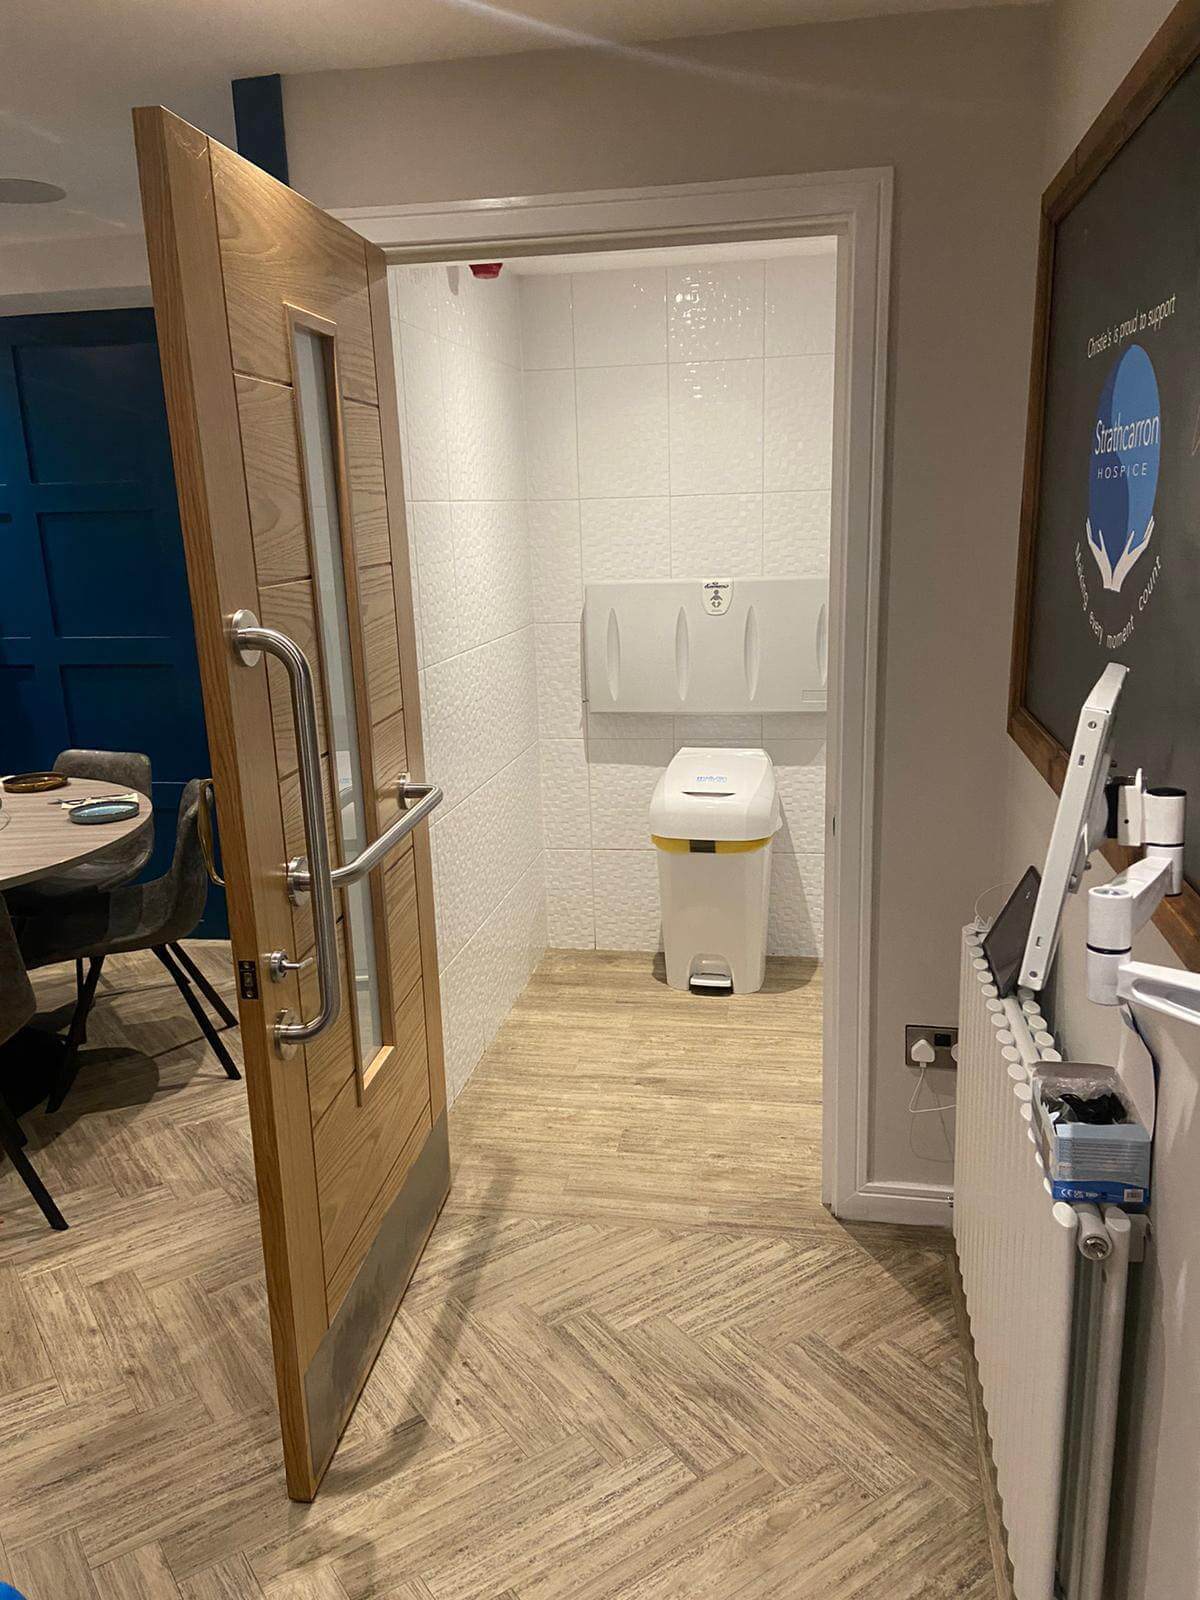 Accessible toilet at Christie's Falkirk restaurant